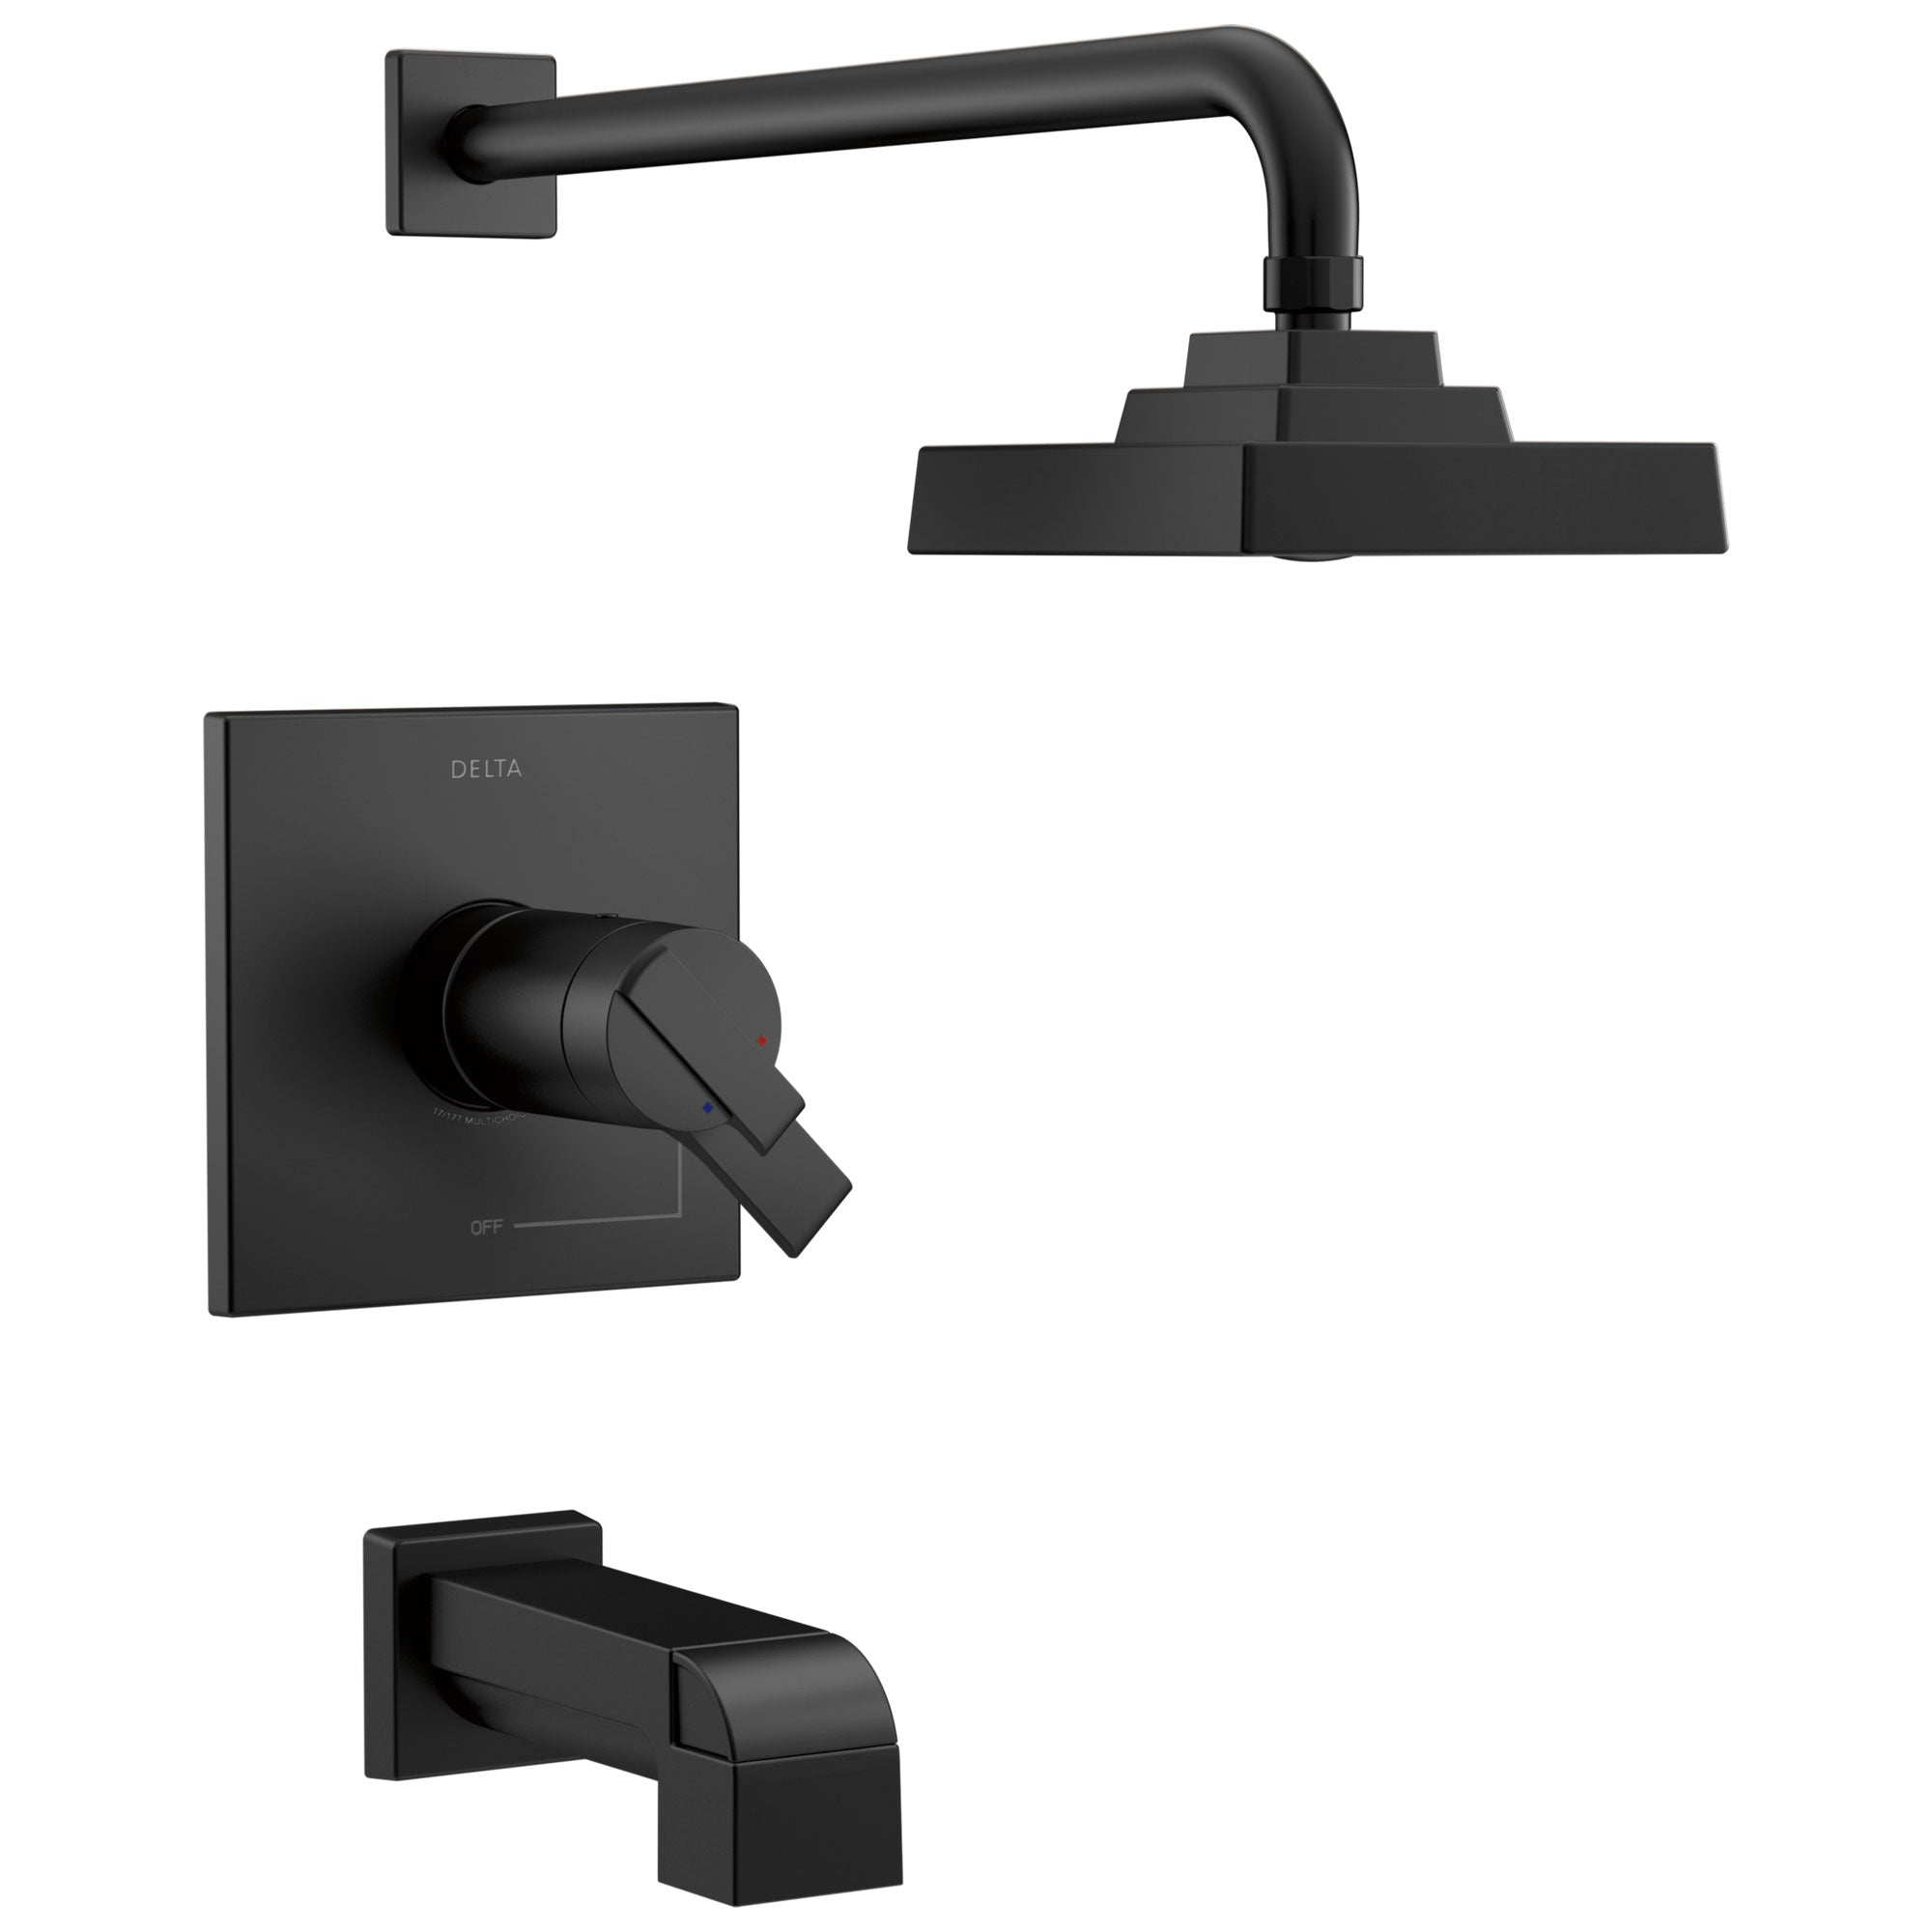 Delta Ara Matte Black Finish Thermostatic Tub and Shower Faucet Combo Includes Handles, 17T Cartridge, and Rough-in Valve with Stops D3627V